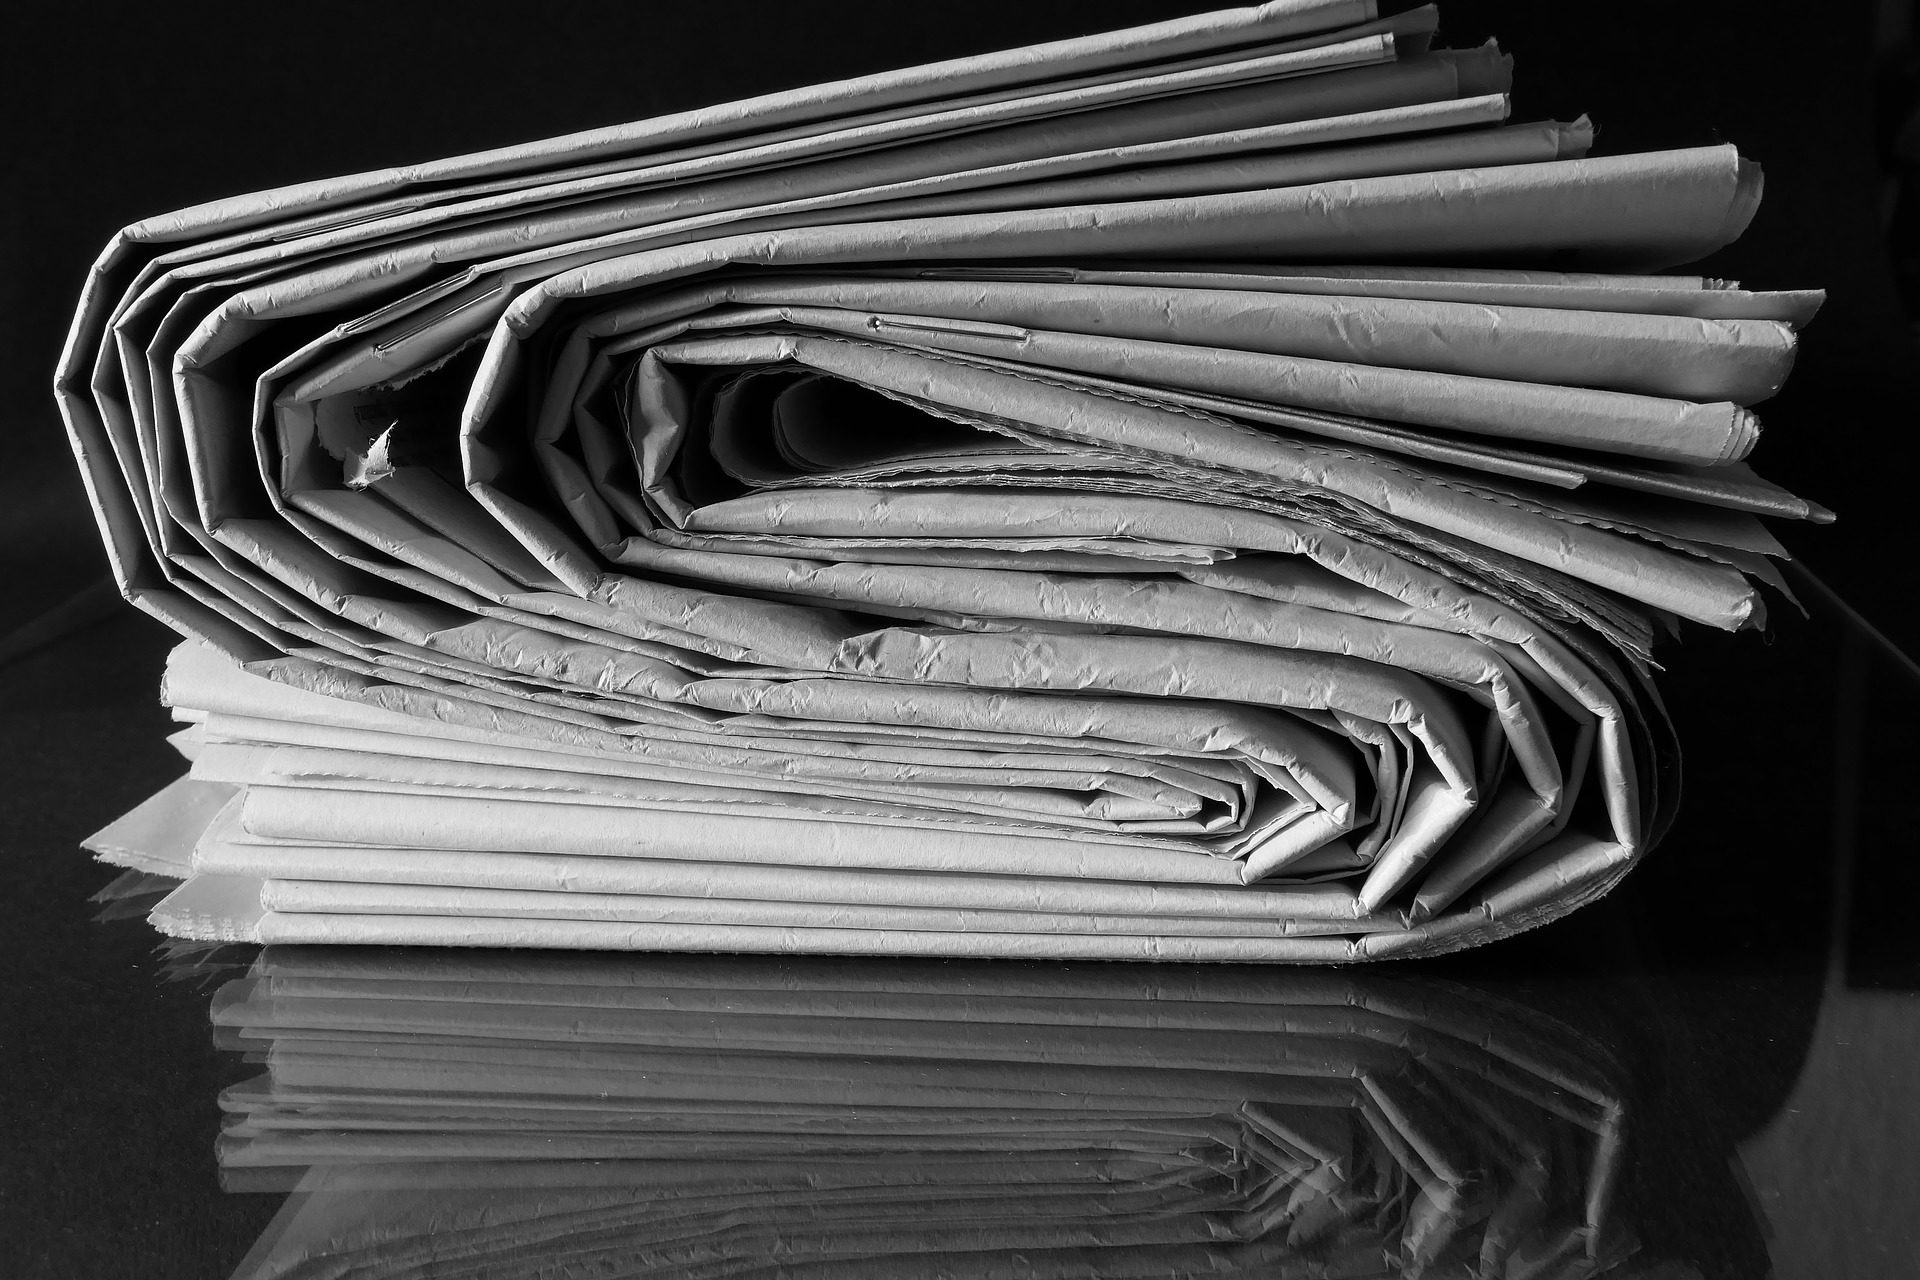 Stack of newspapers curved in s-shape, in black and white